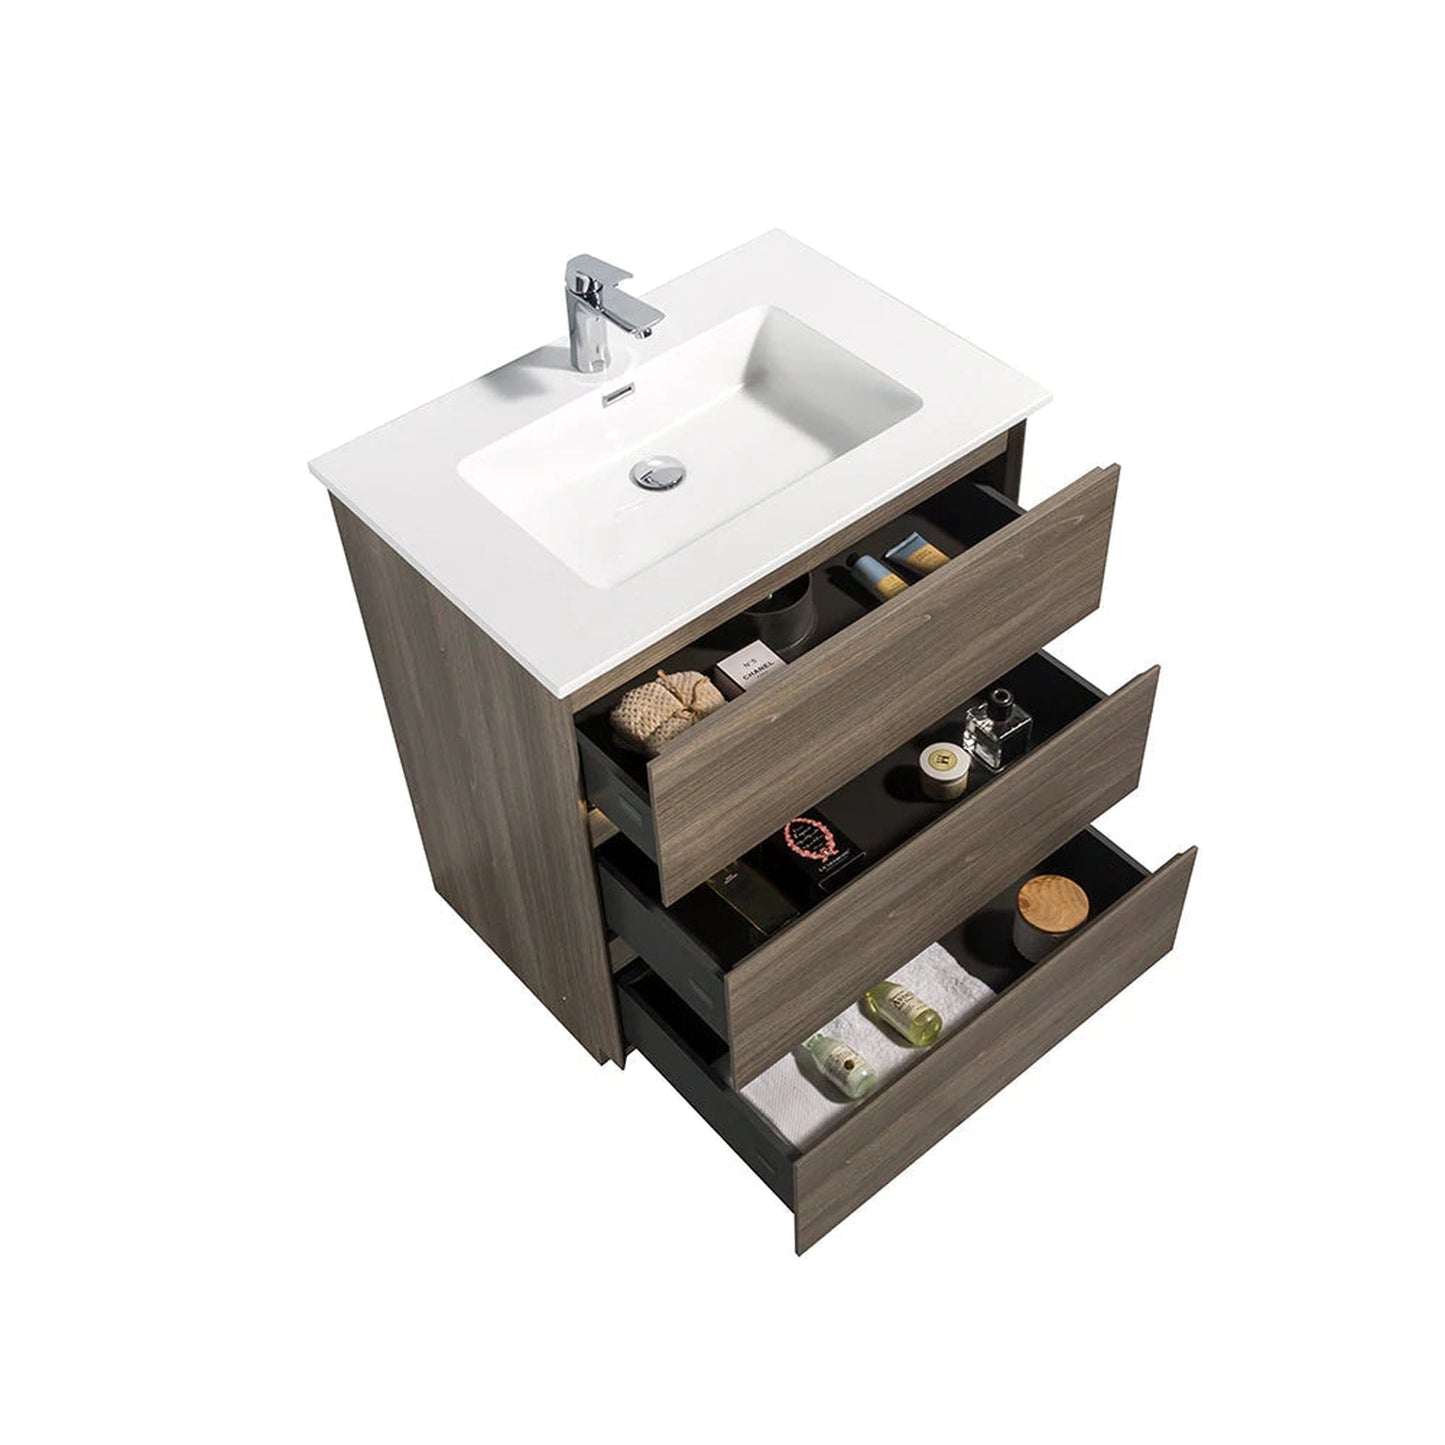 TONA Edison 42" Maple Gray & White Freestanding Bathroom Vanity With Artificial Stone Integrated Top & Sink